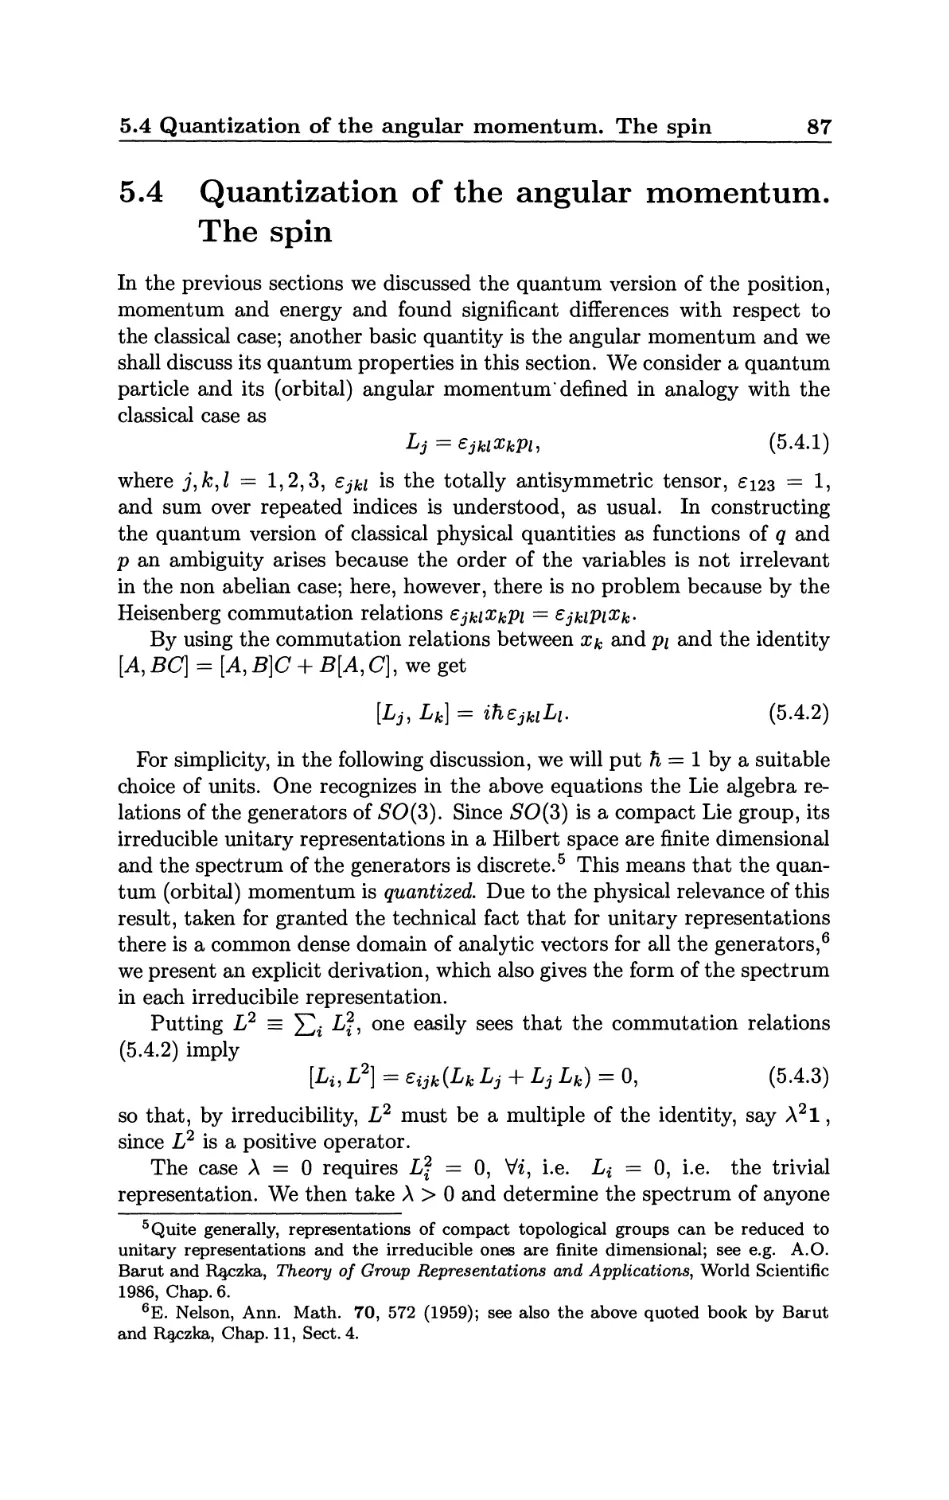 5.4 Quantization of the angular momentum. The spin